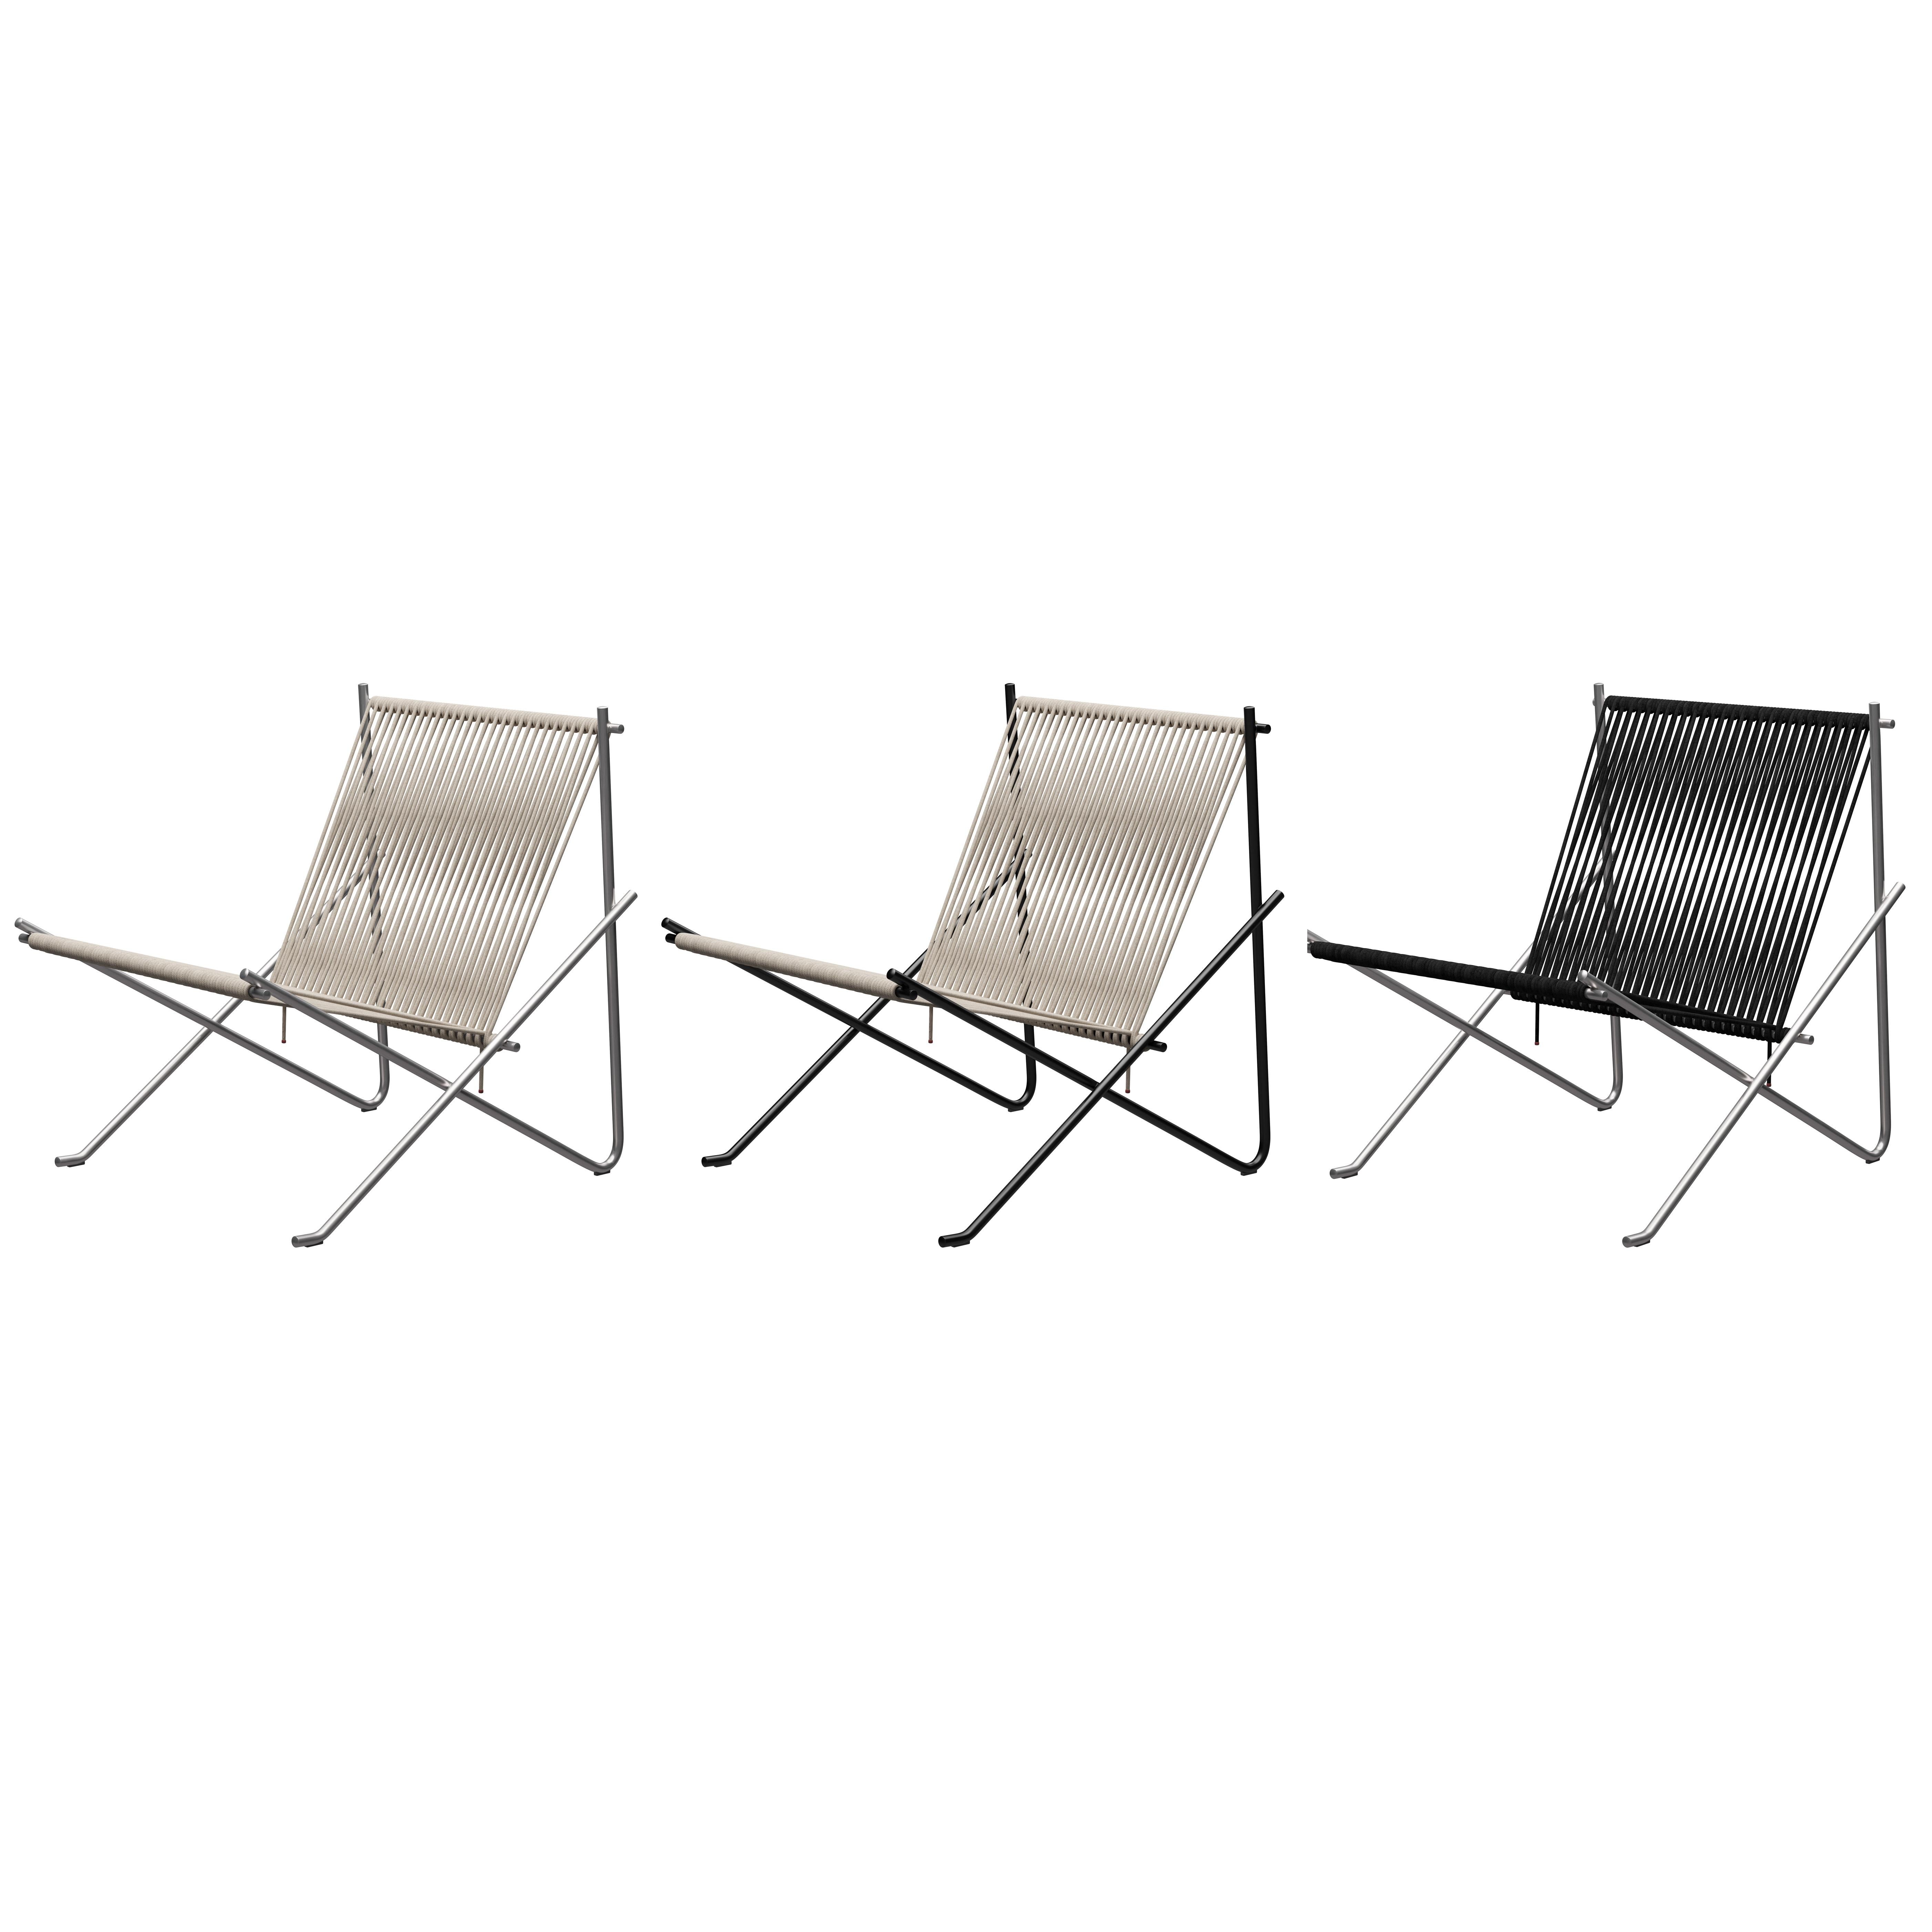 'PK4' Lounge Chair for Fritz Hansen in Black Flag Halyard with Steel Frame For Sale 2